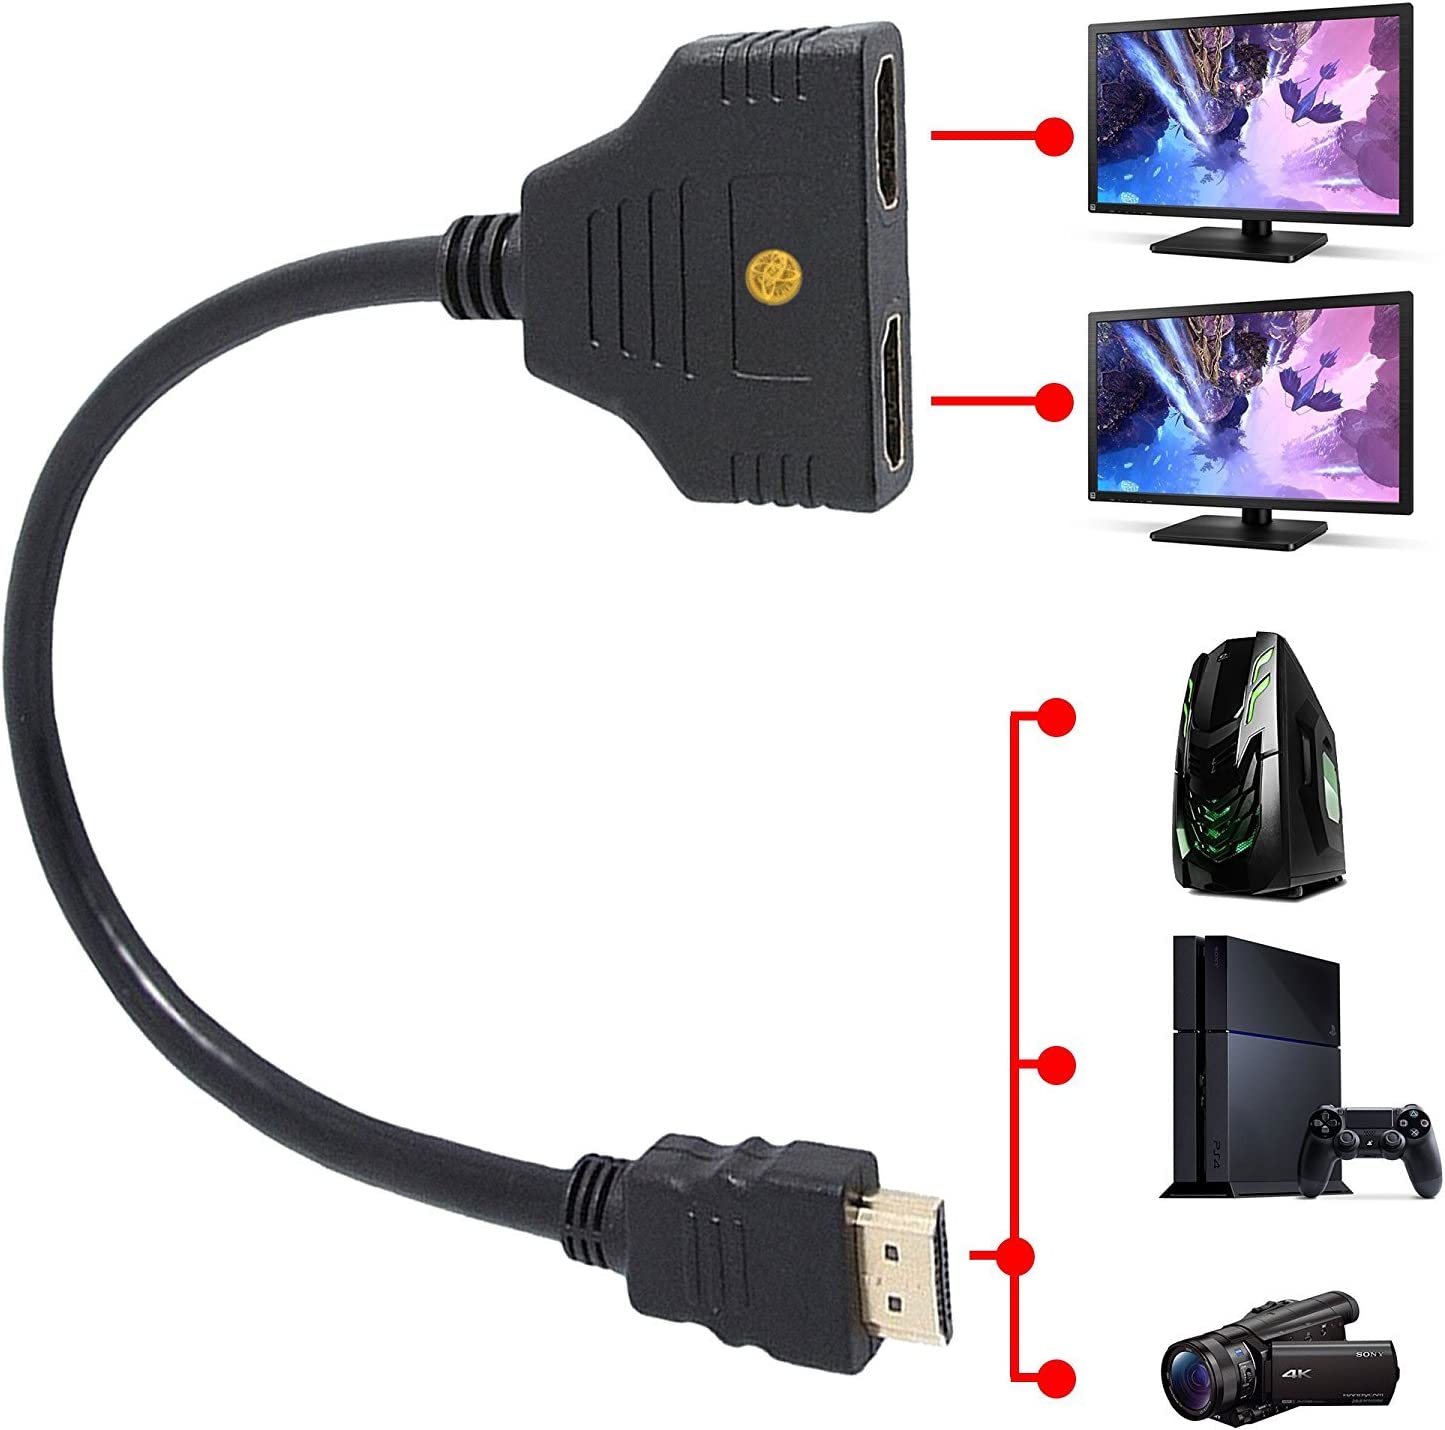 EZONEDEAL HDMI Splitter-HDMI Splitter 1 in 2 Out/HDMI Splitter Adapter Cable HDMI Male to Dual HDMI Female 1 to 2 Way,Support Two TVs at The Same Time